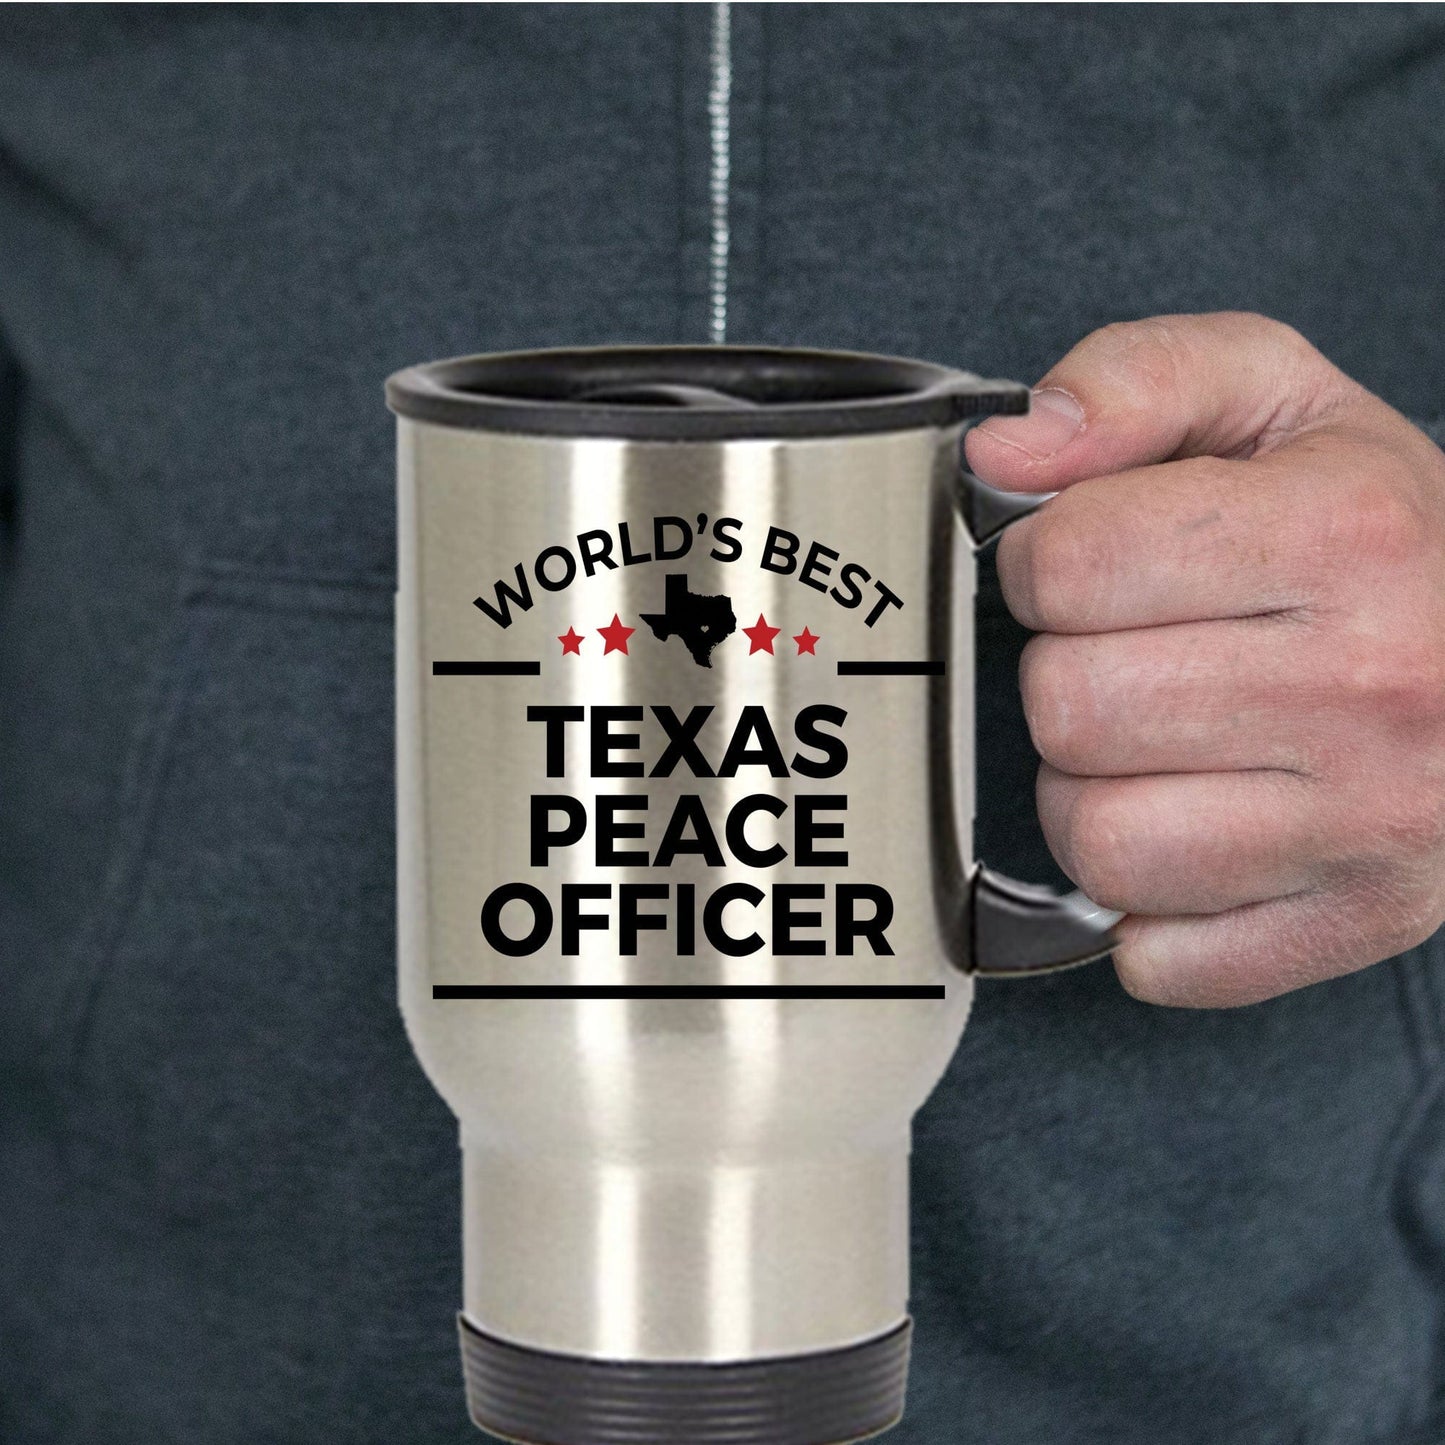 Texas Peace Officer Gift World's Best Stainless Steel Insulated Travel Coffee Mug